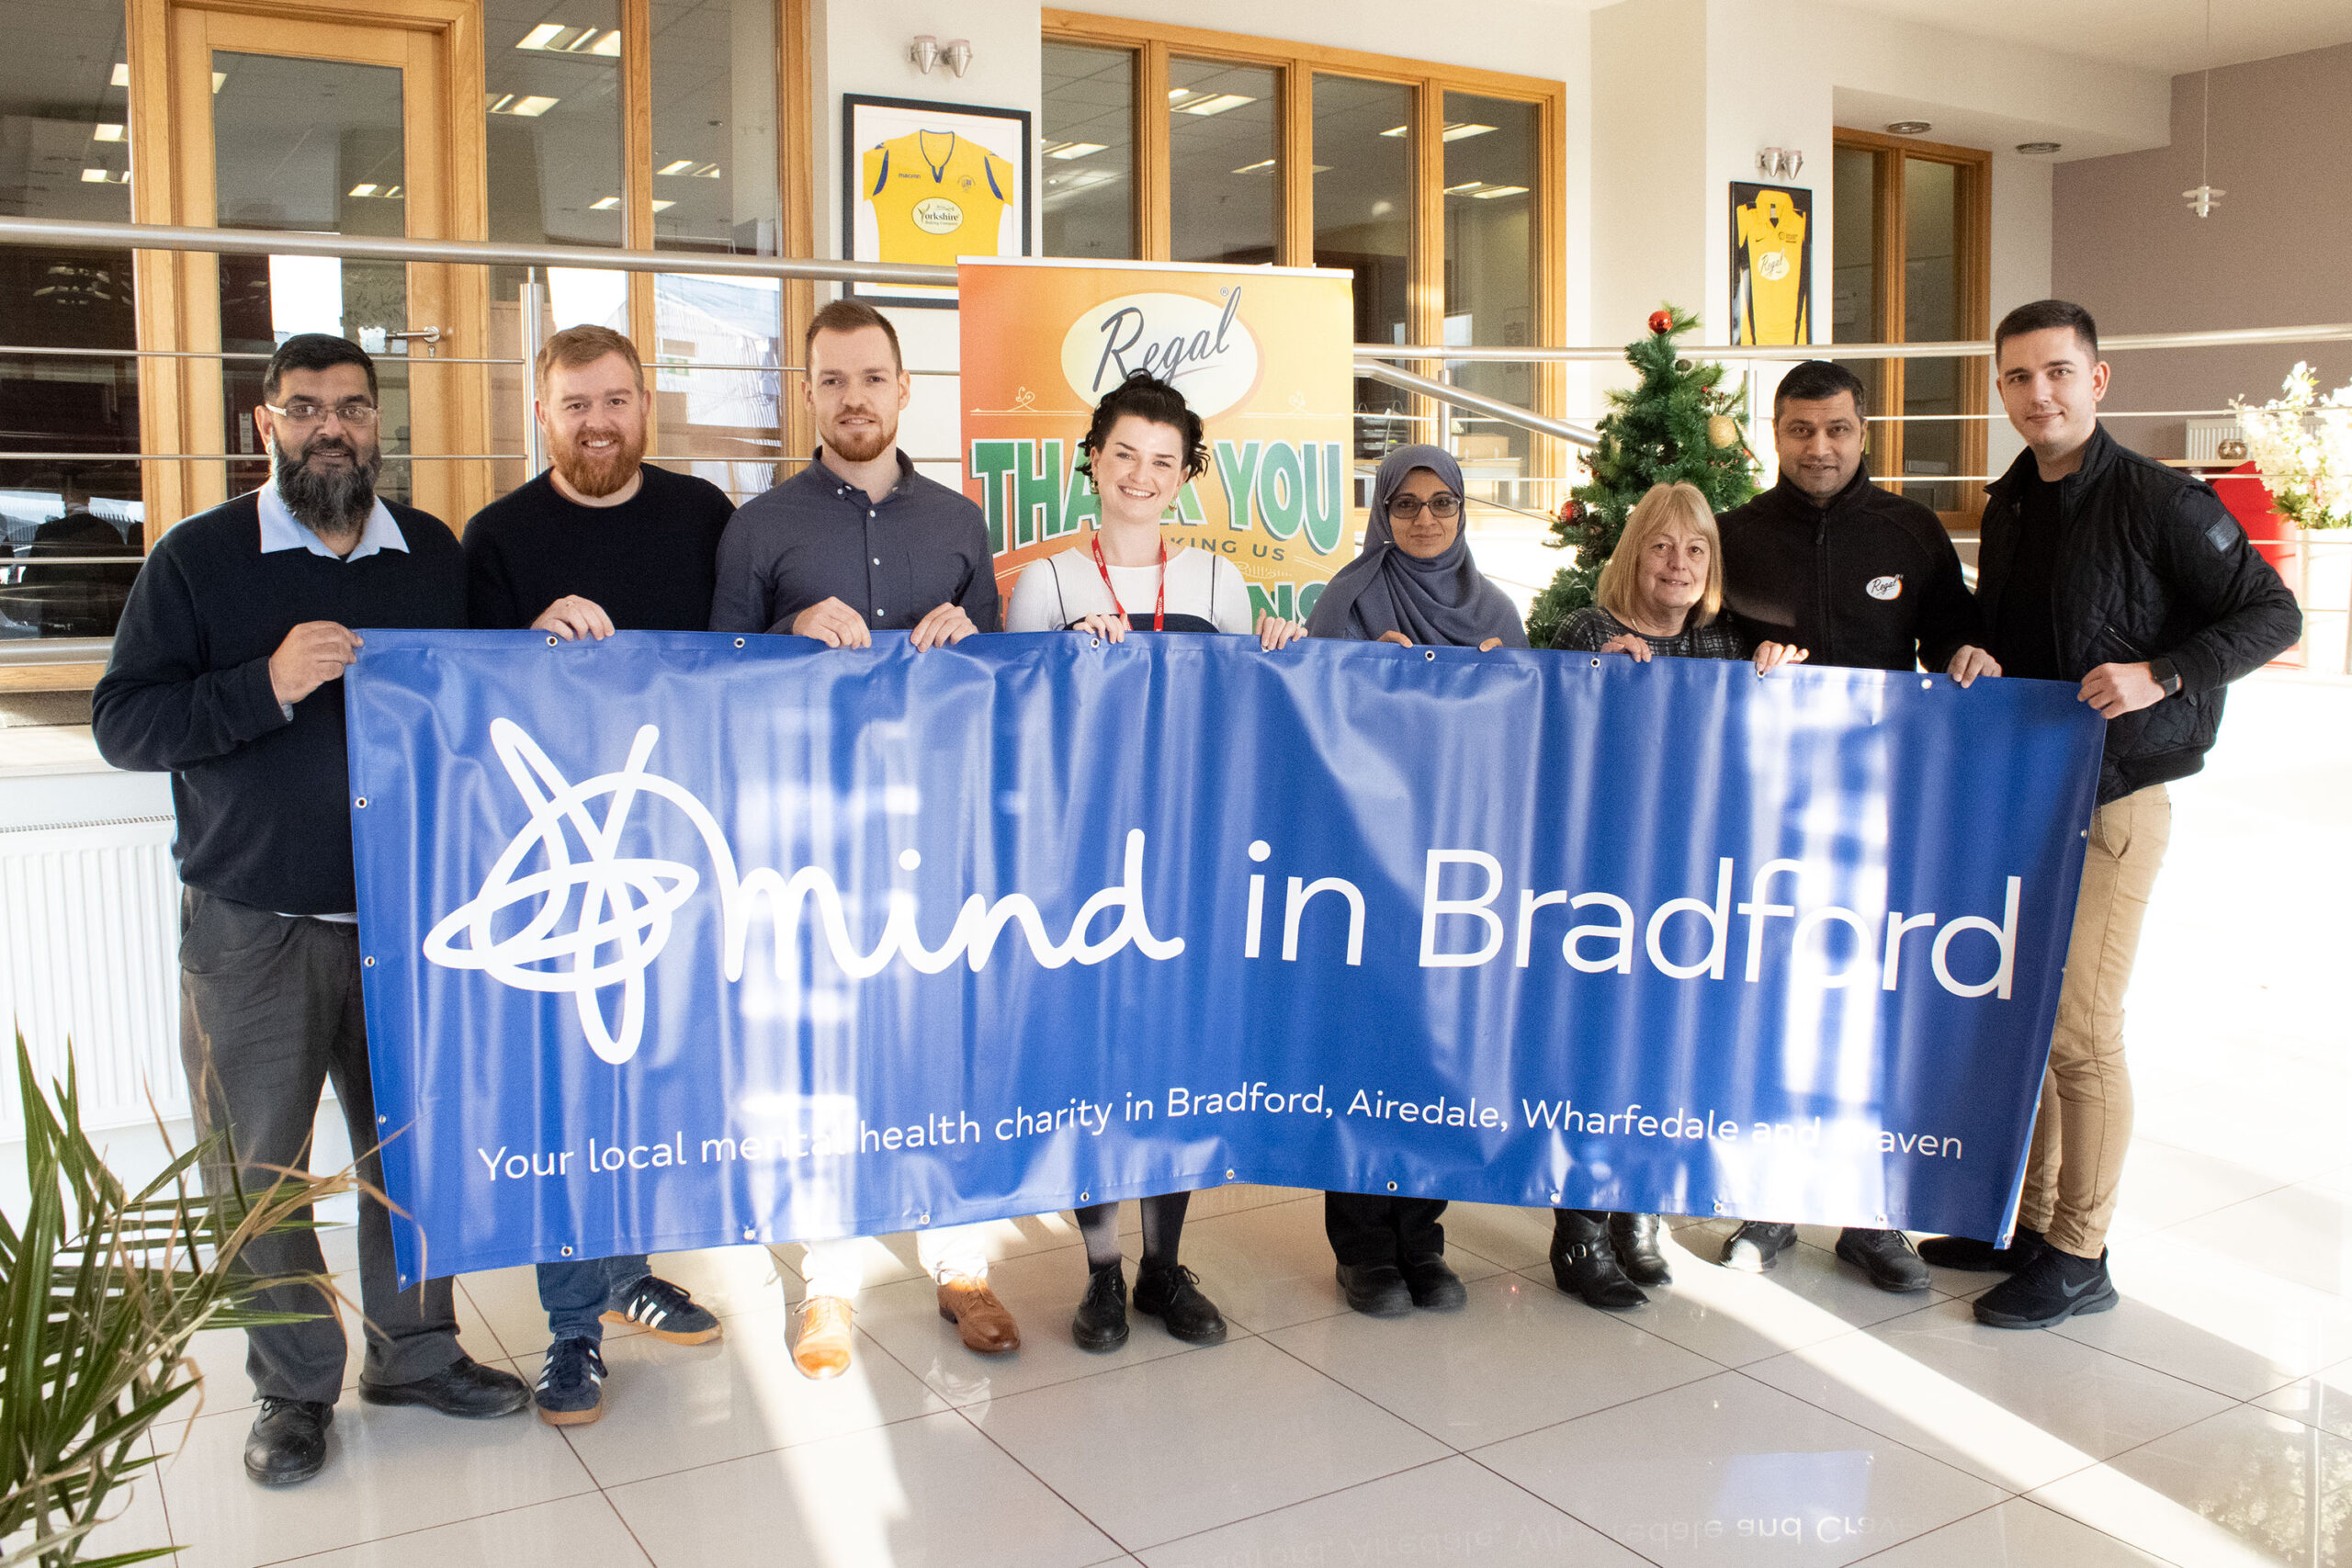 Regal Foods Announce Mind in Bradford as Charity of the Year